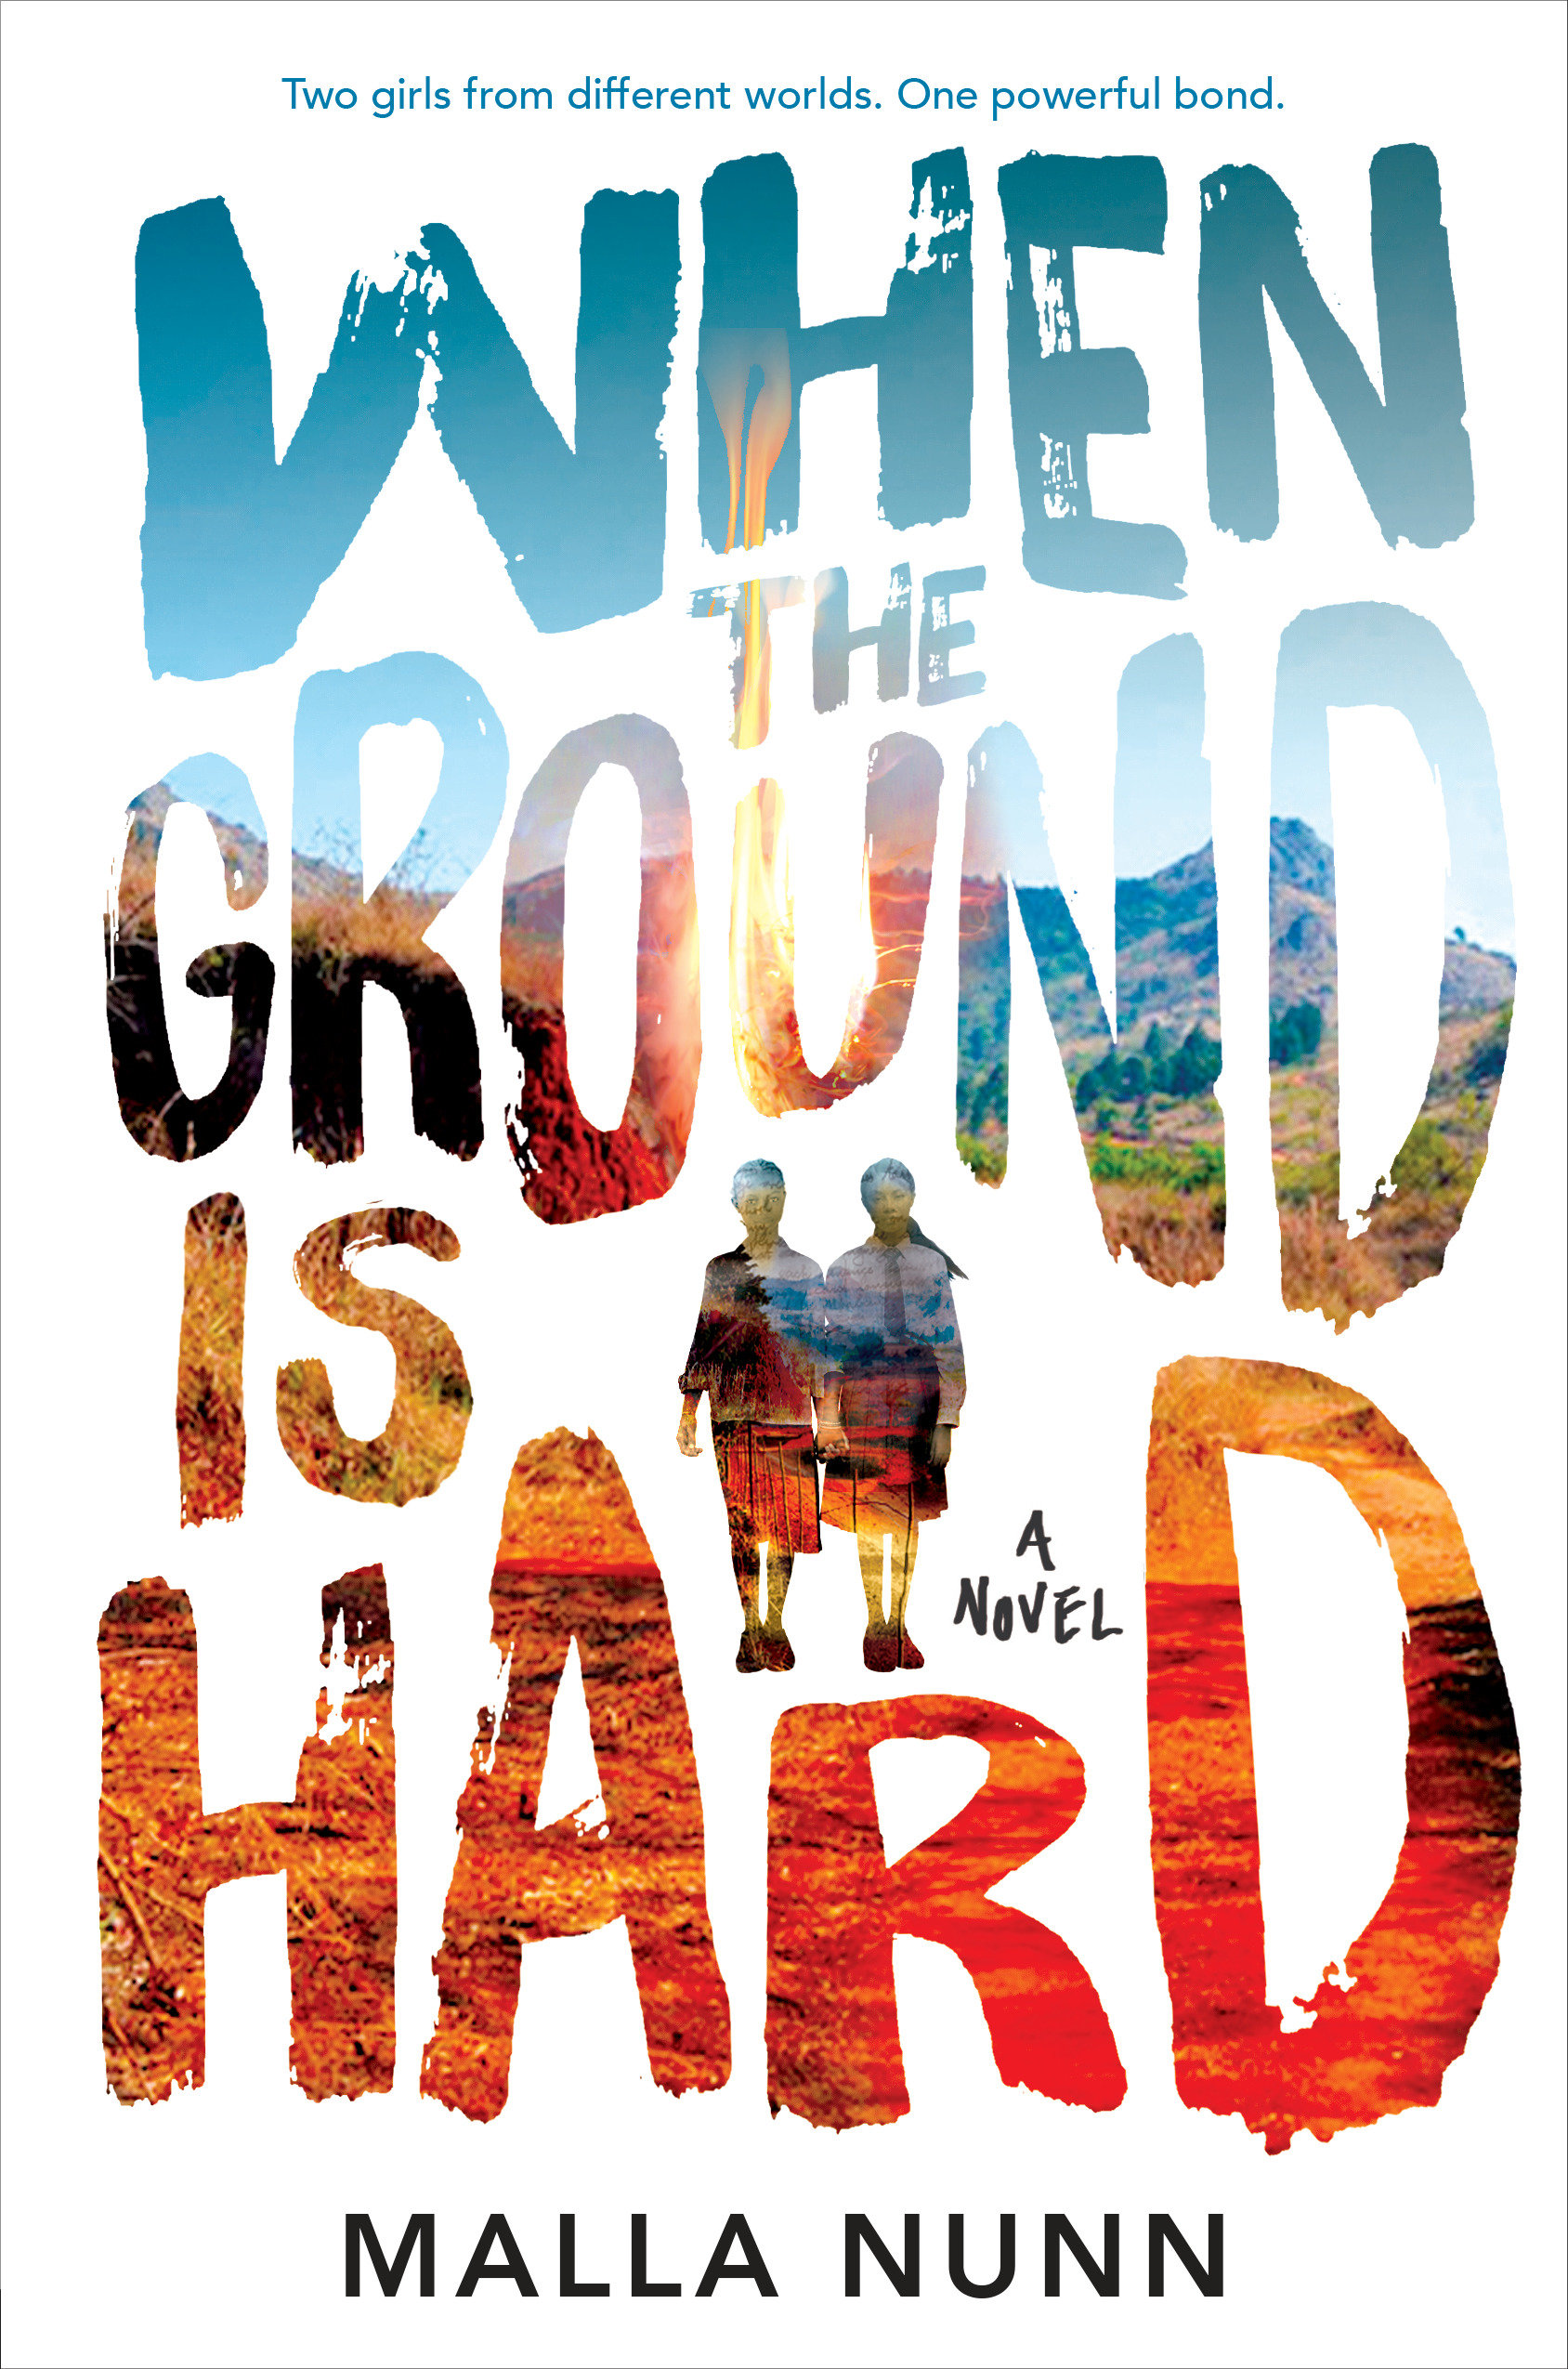 When The Ground Is Hard (Hardcover Book)